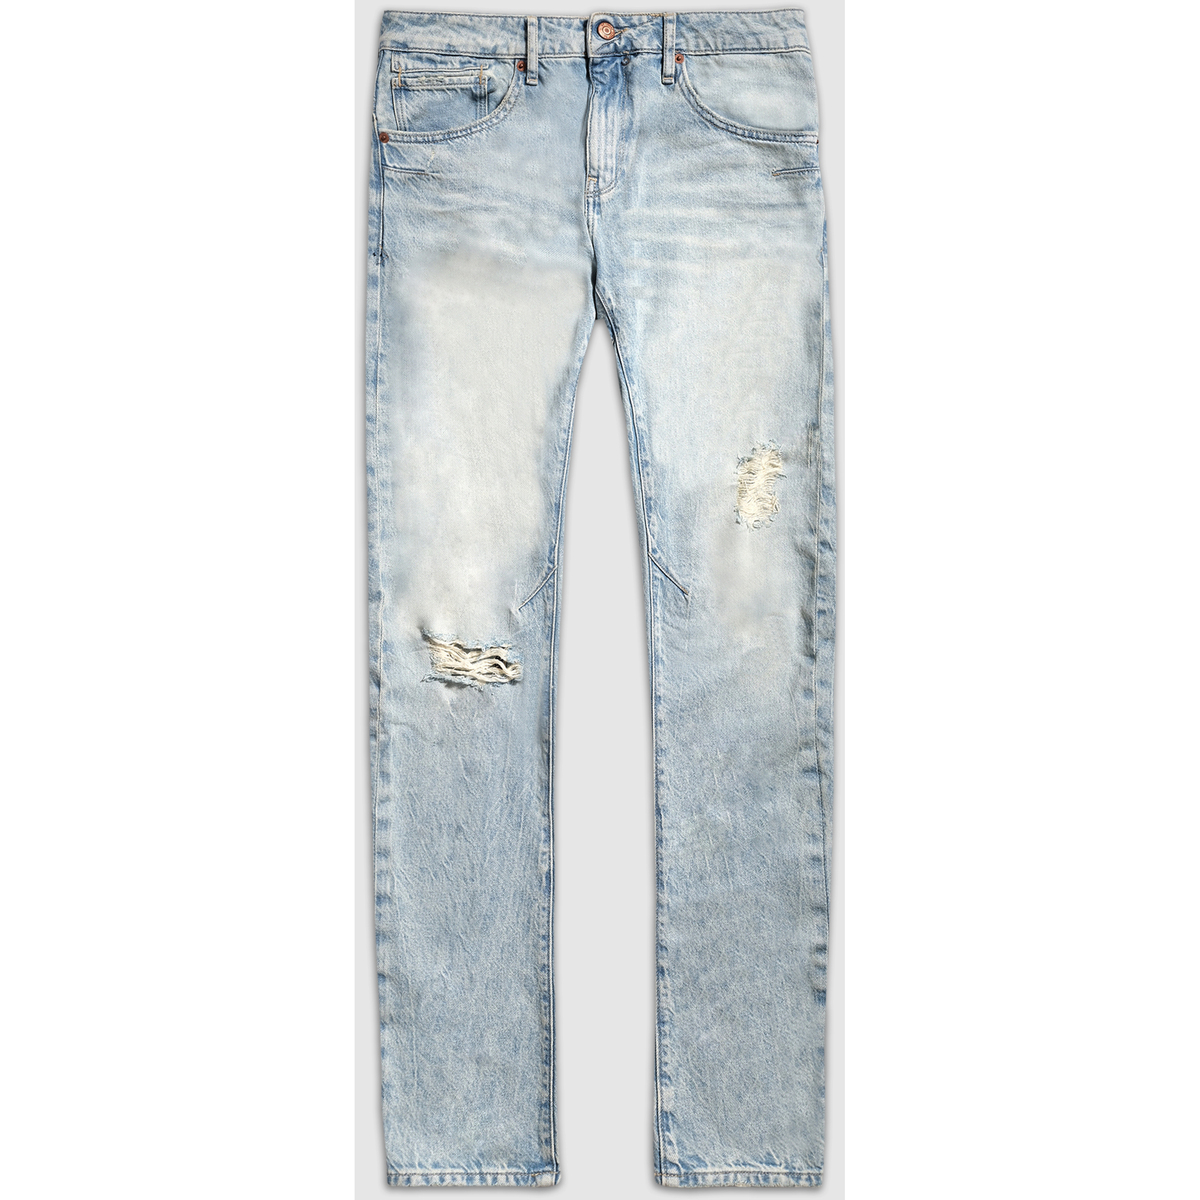 Teddy Smith Bleu Jean confort - TYLER ARC TAPERED COMFORT rpZgwi6d